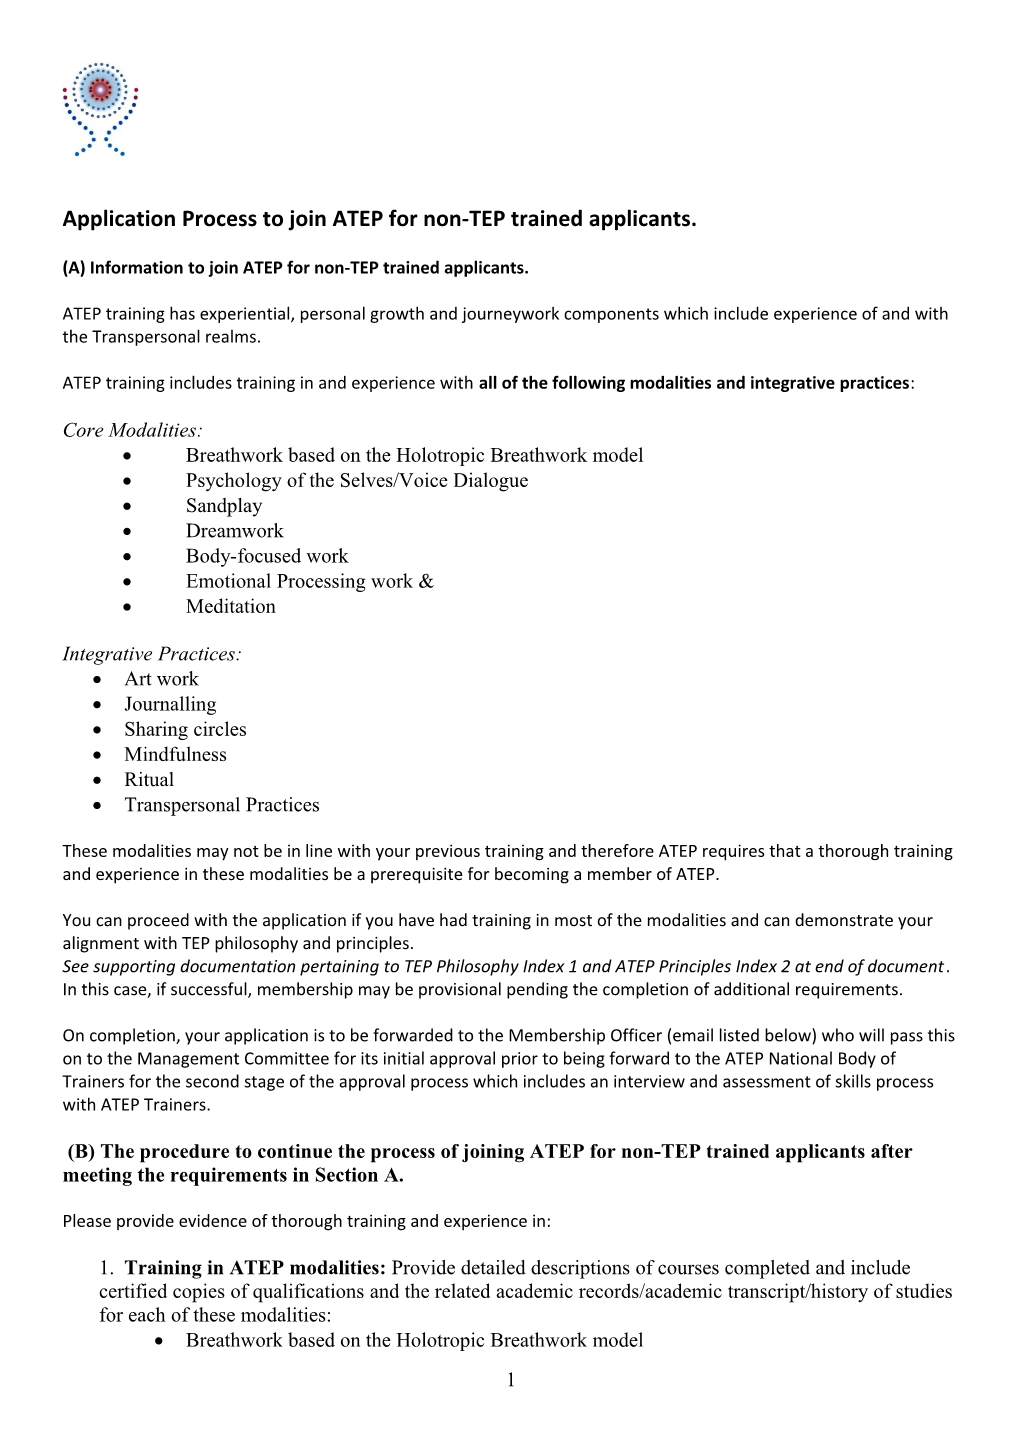 Application Process to Join ATEP for Non-TEP Trained Applicants